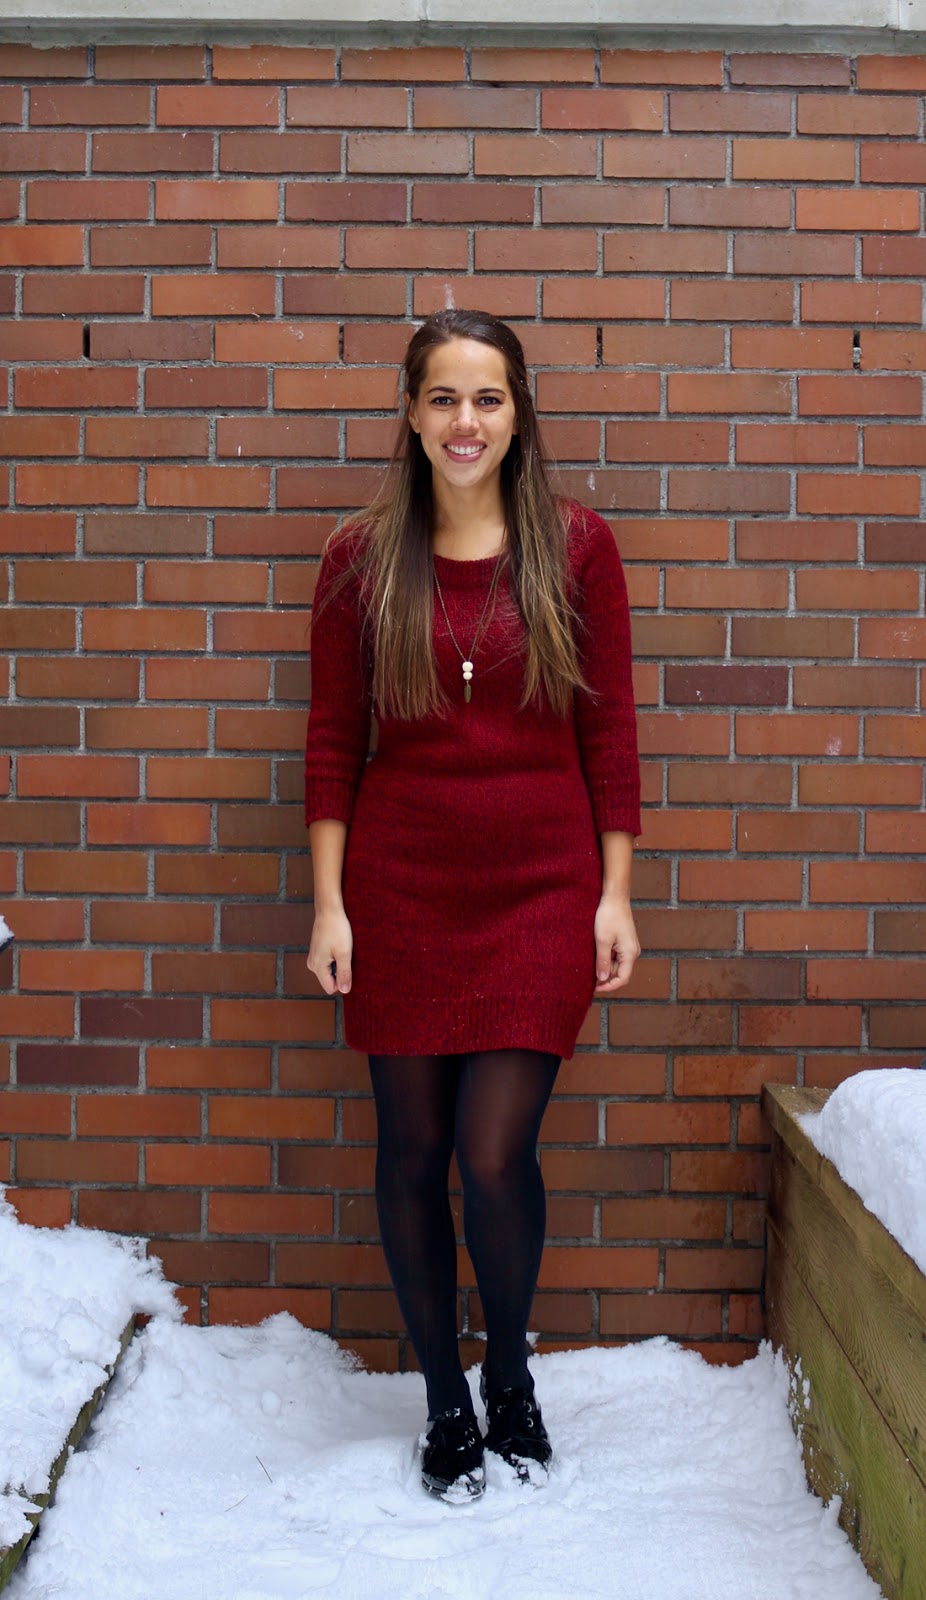 Jules in Flats - Burgundy Sweater Dress (Business Casual Winter Workwear on a Budget)